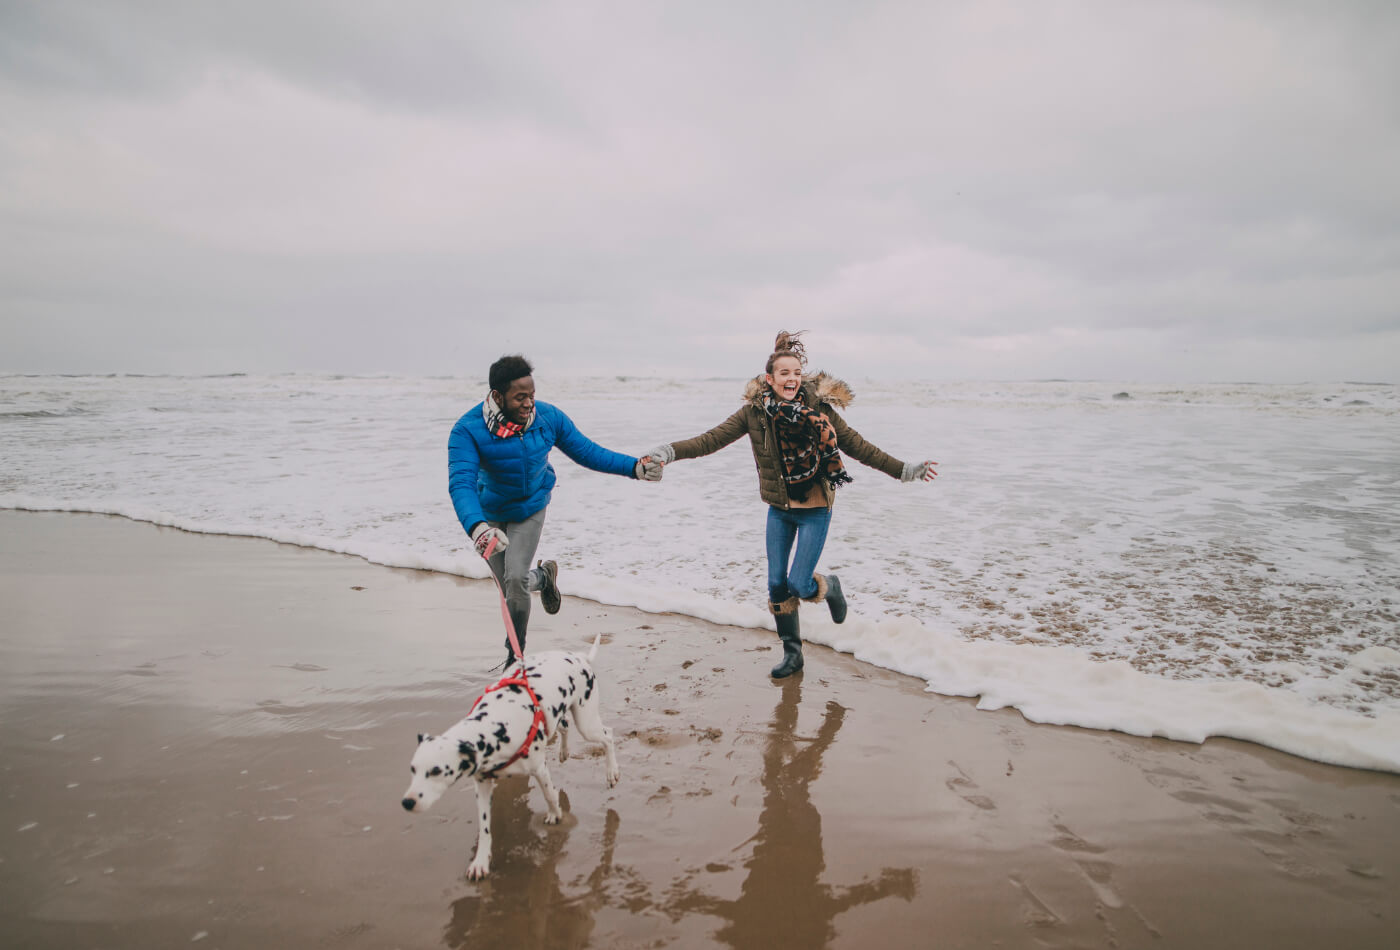 Couple running on beach in Cornwall in winter with Dalmation dog.